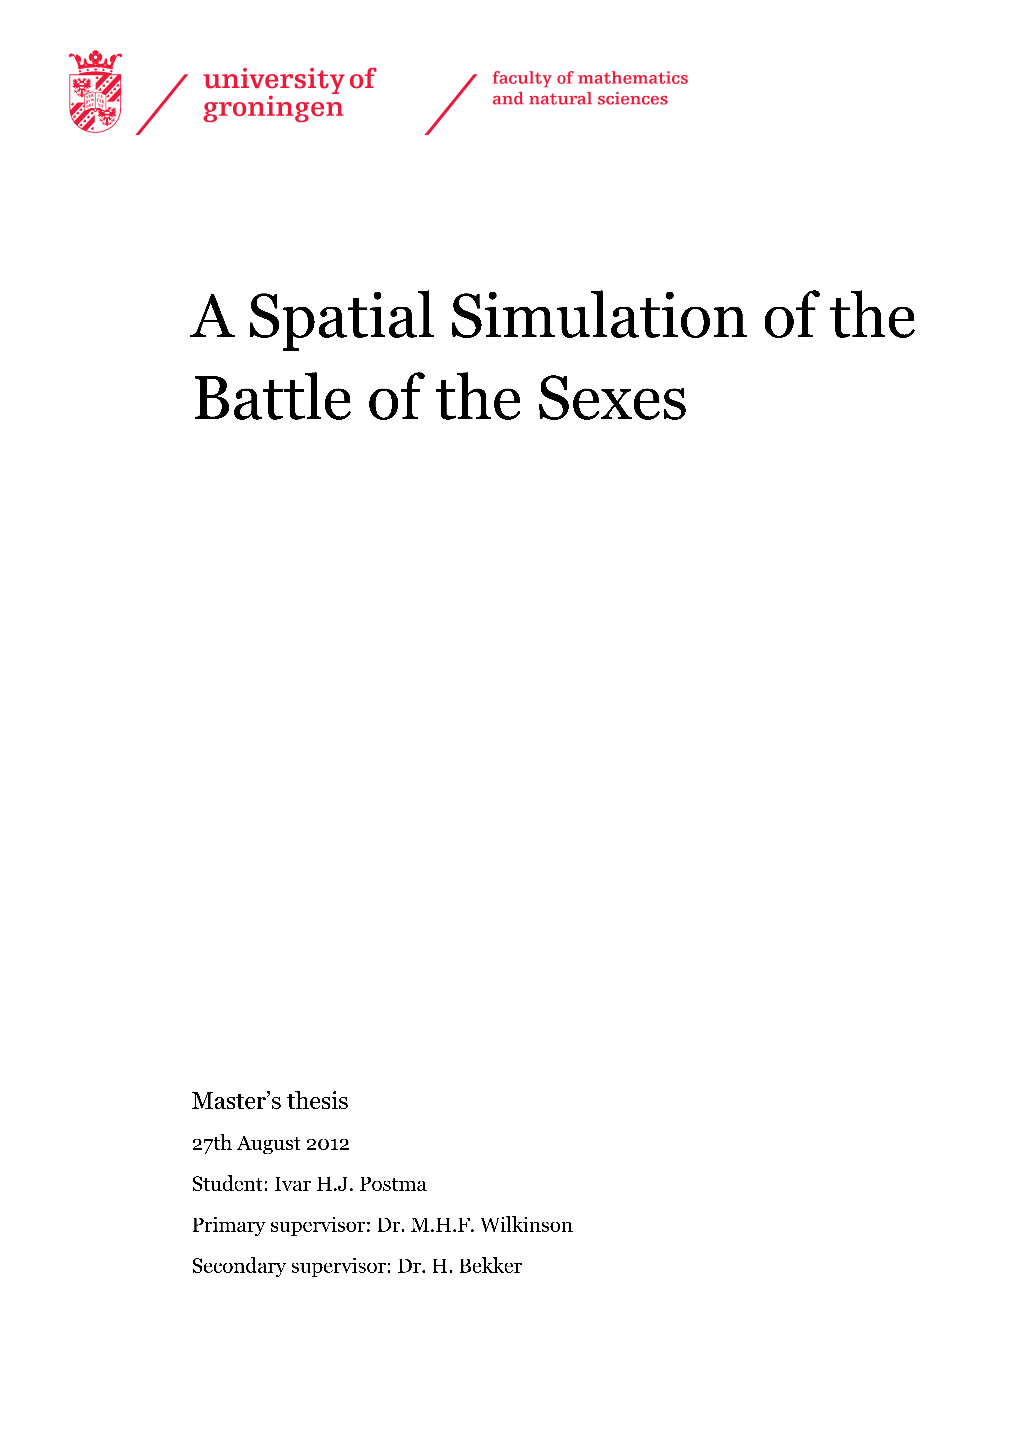 A Spatial Simulation of the Battle of the Sexes